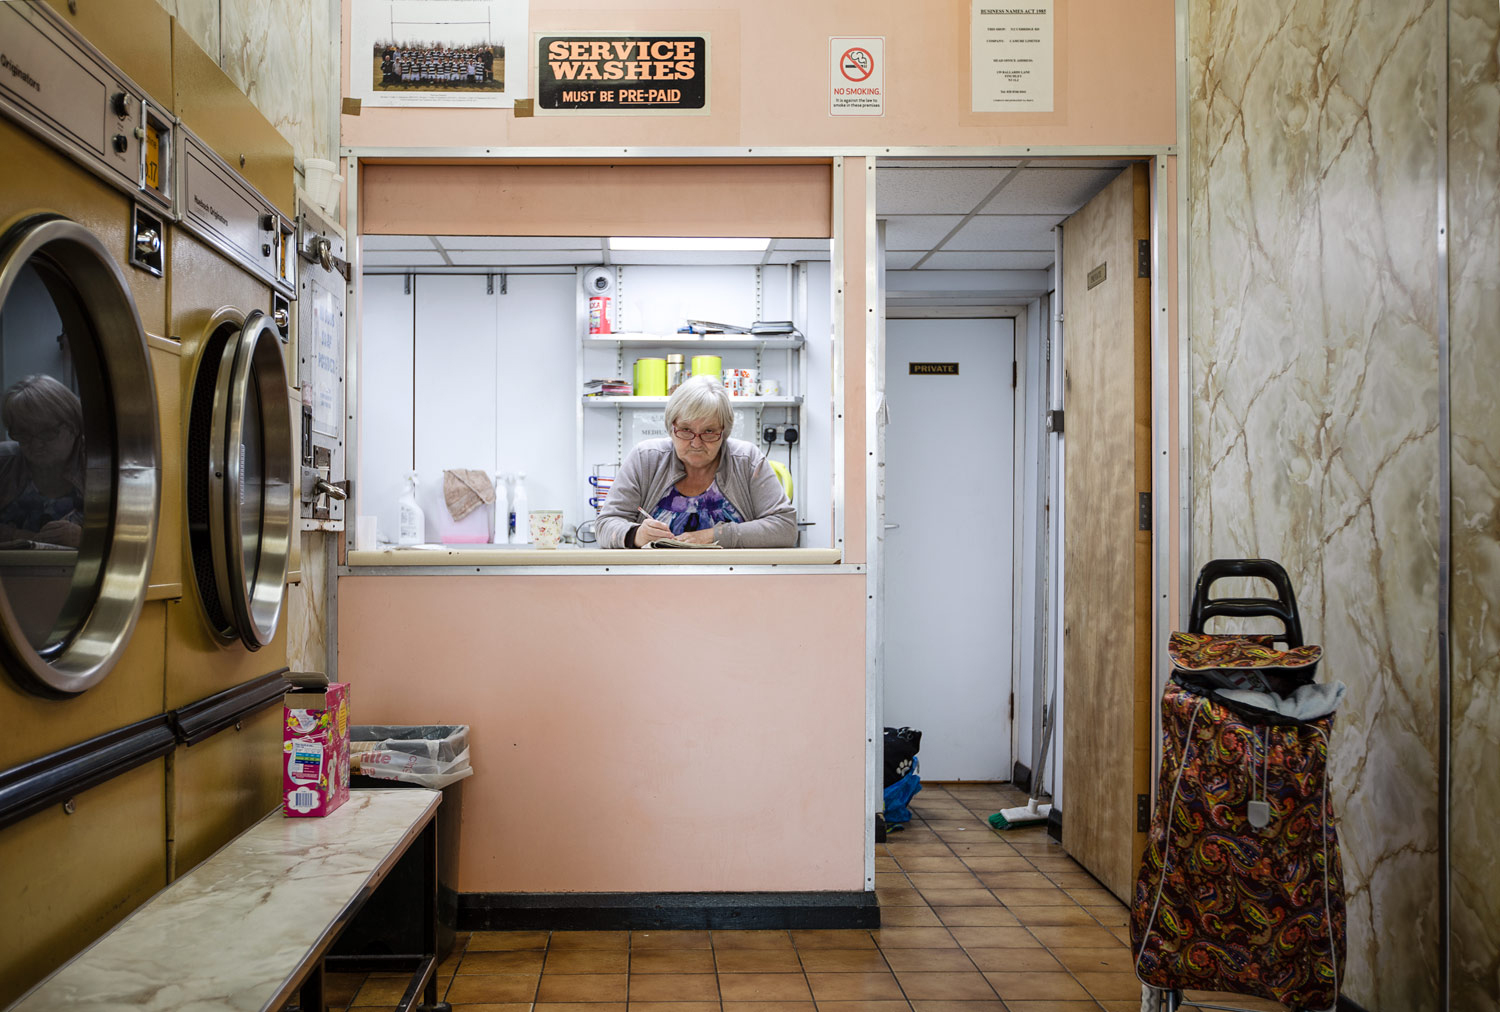 How London’s launderettes offer a snapshot of a city in flux